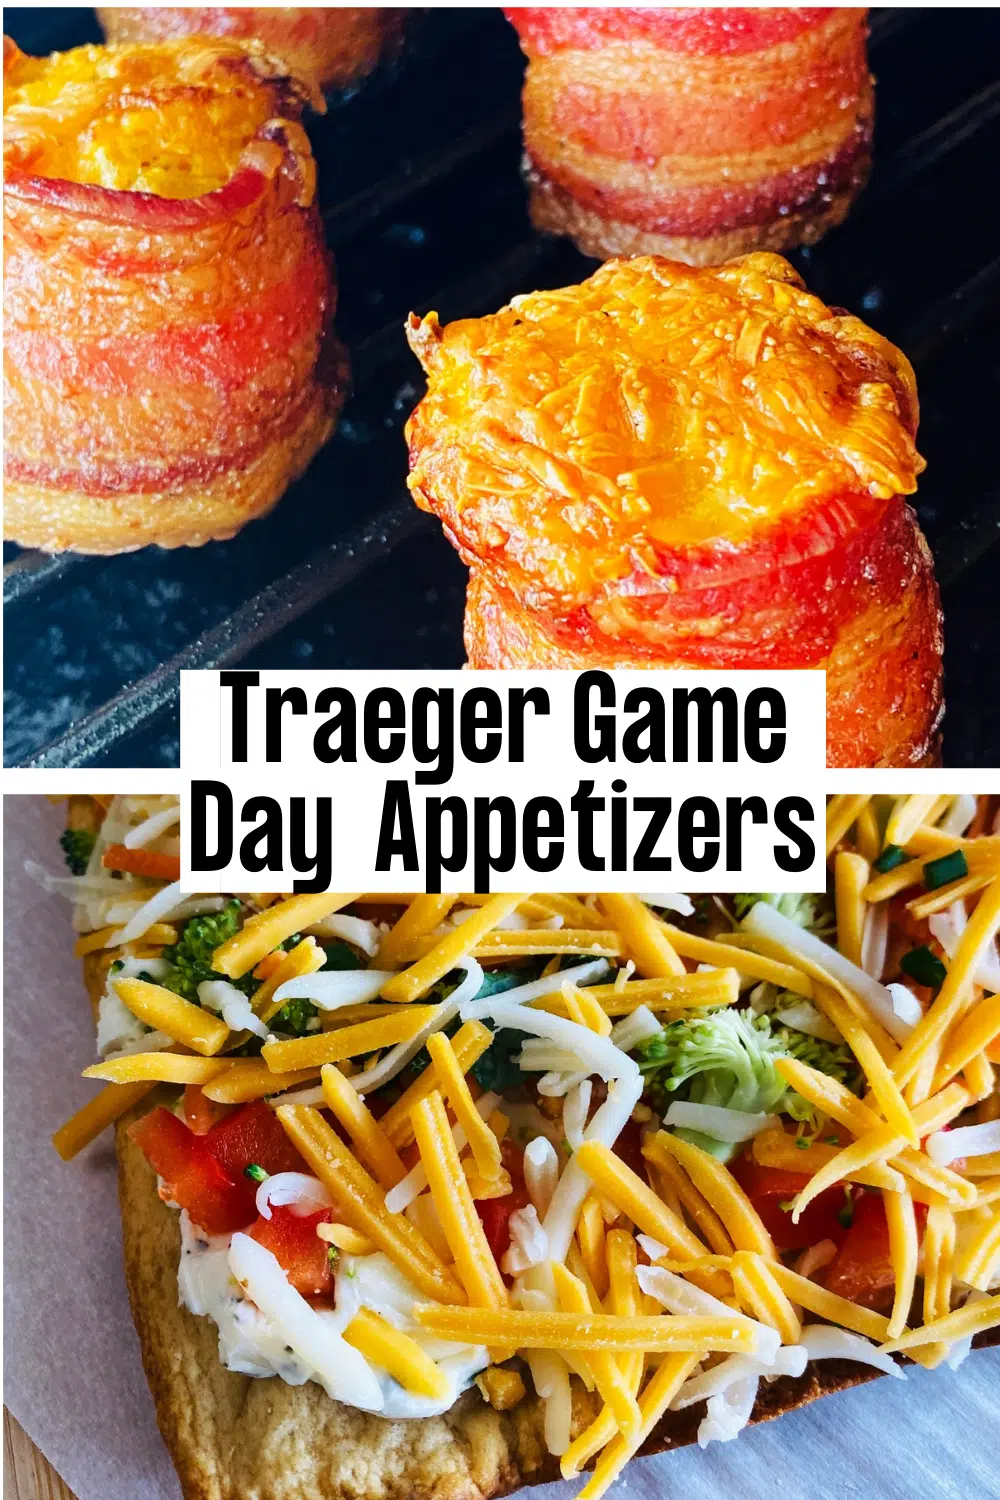 Traeger Game Day Appetizers